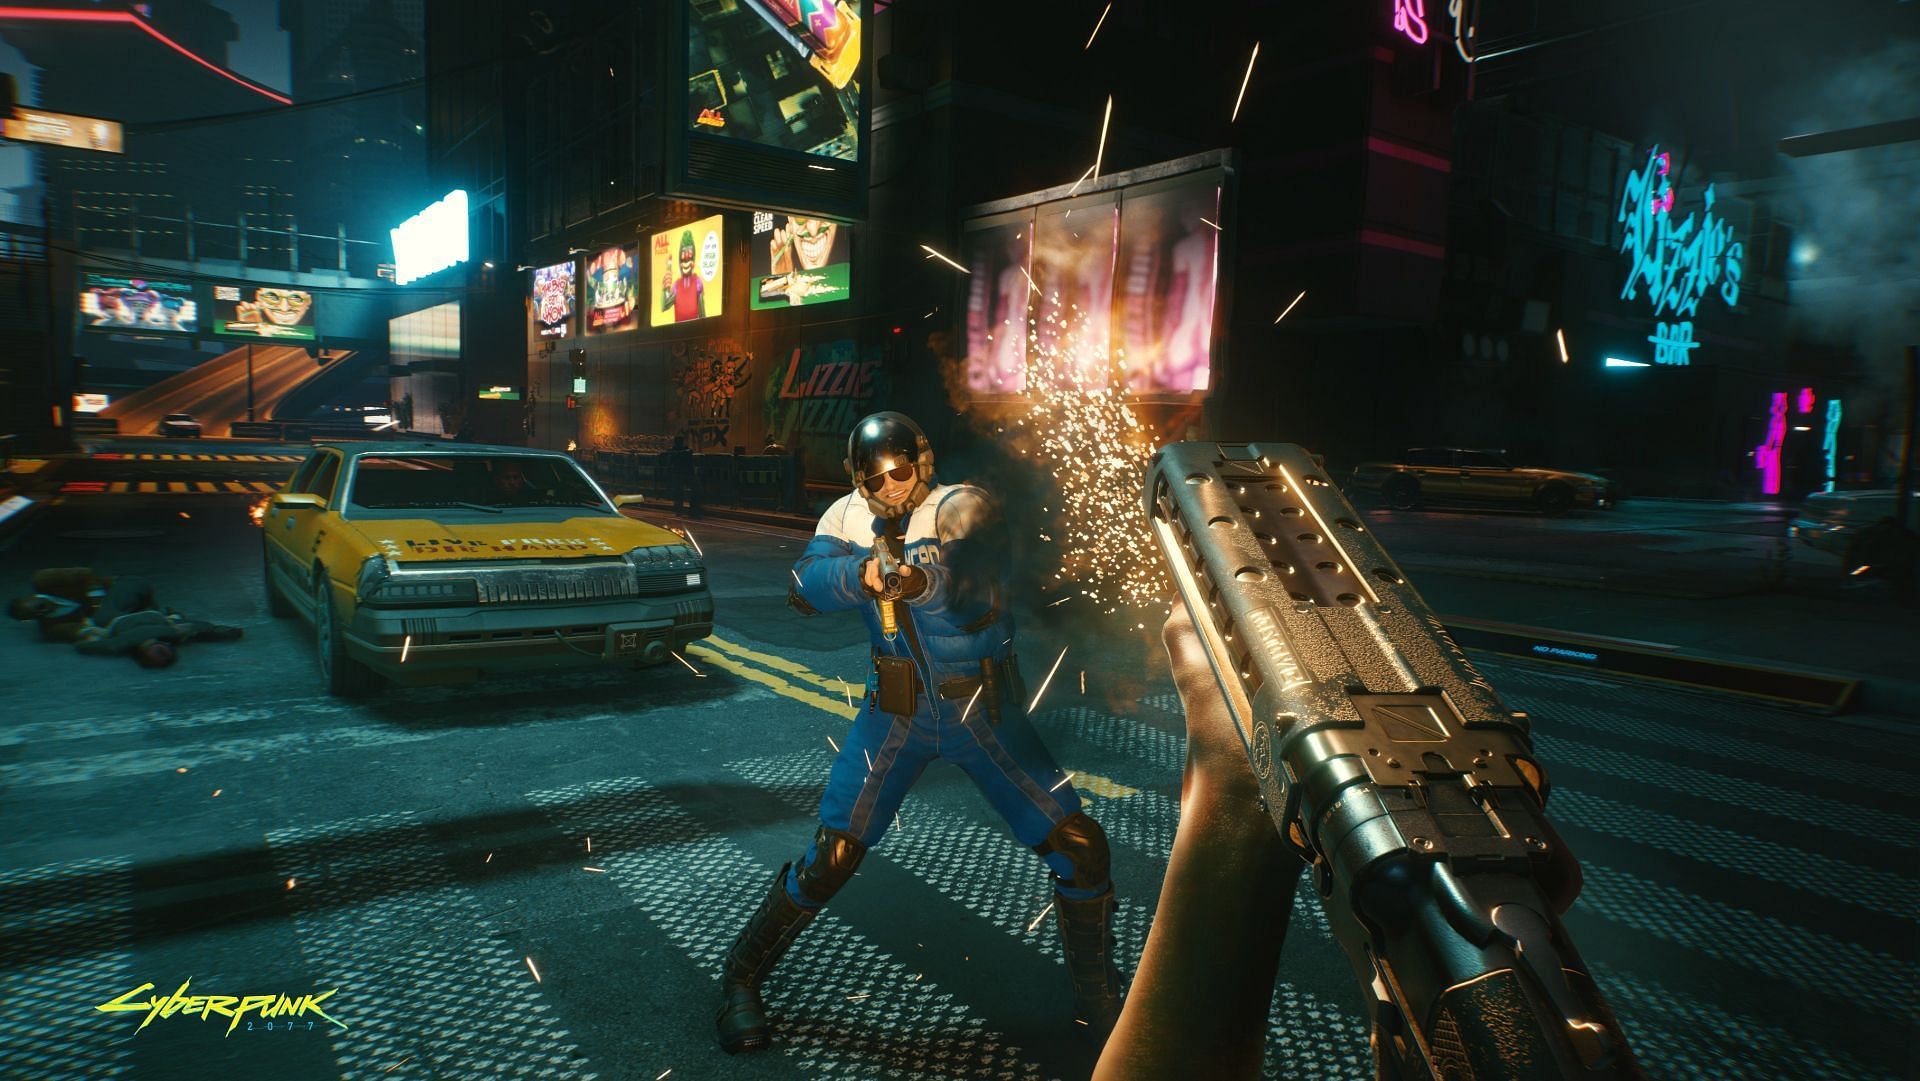 The tech shotguns are one of the most powerful weapons in Cyberpunk 2077 (Image via CD PROJEKT RED)